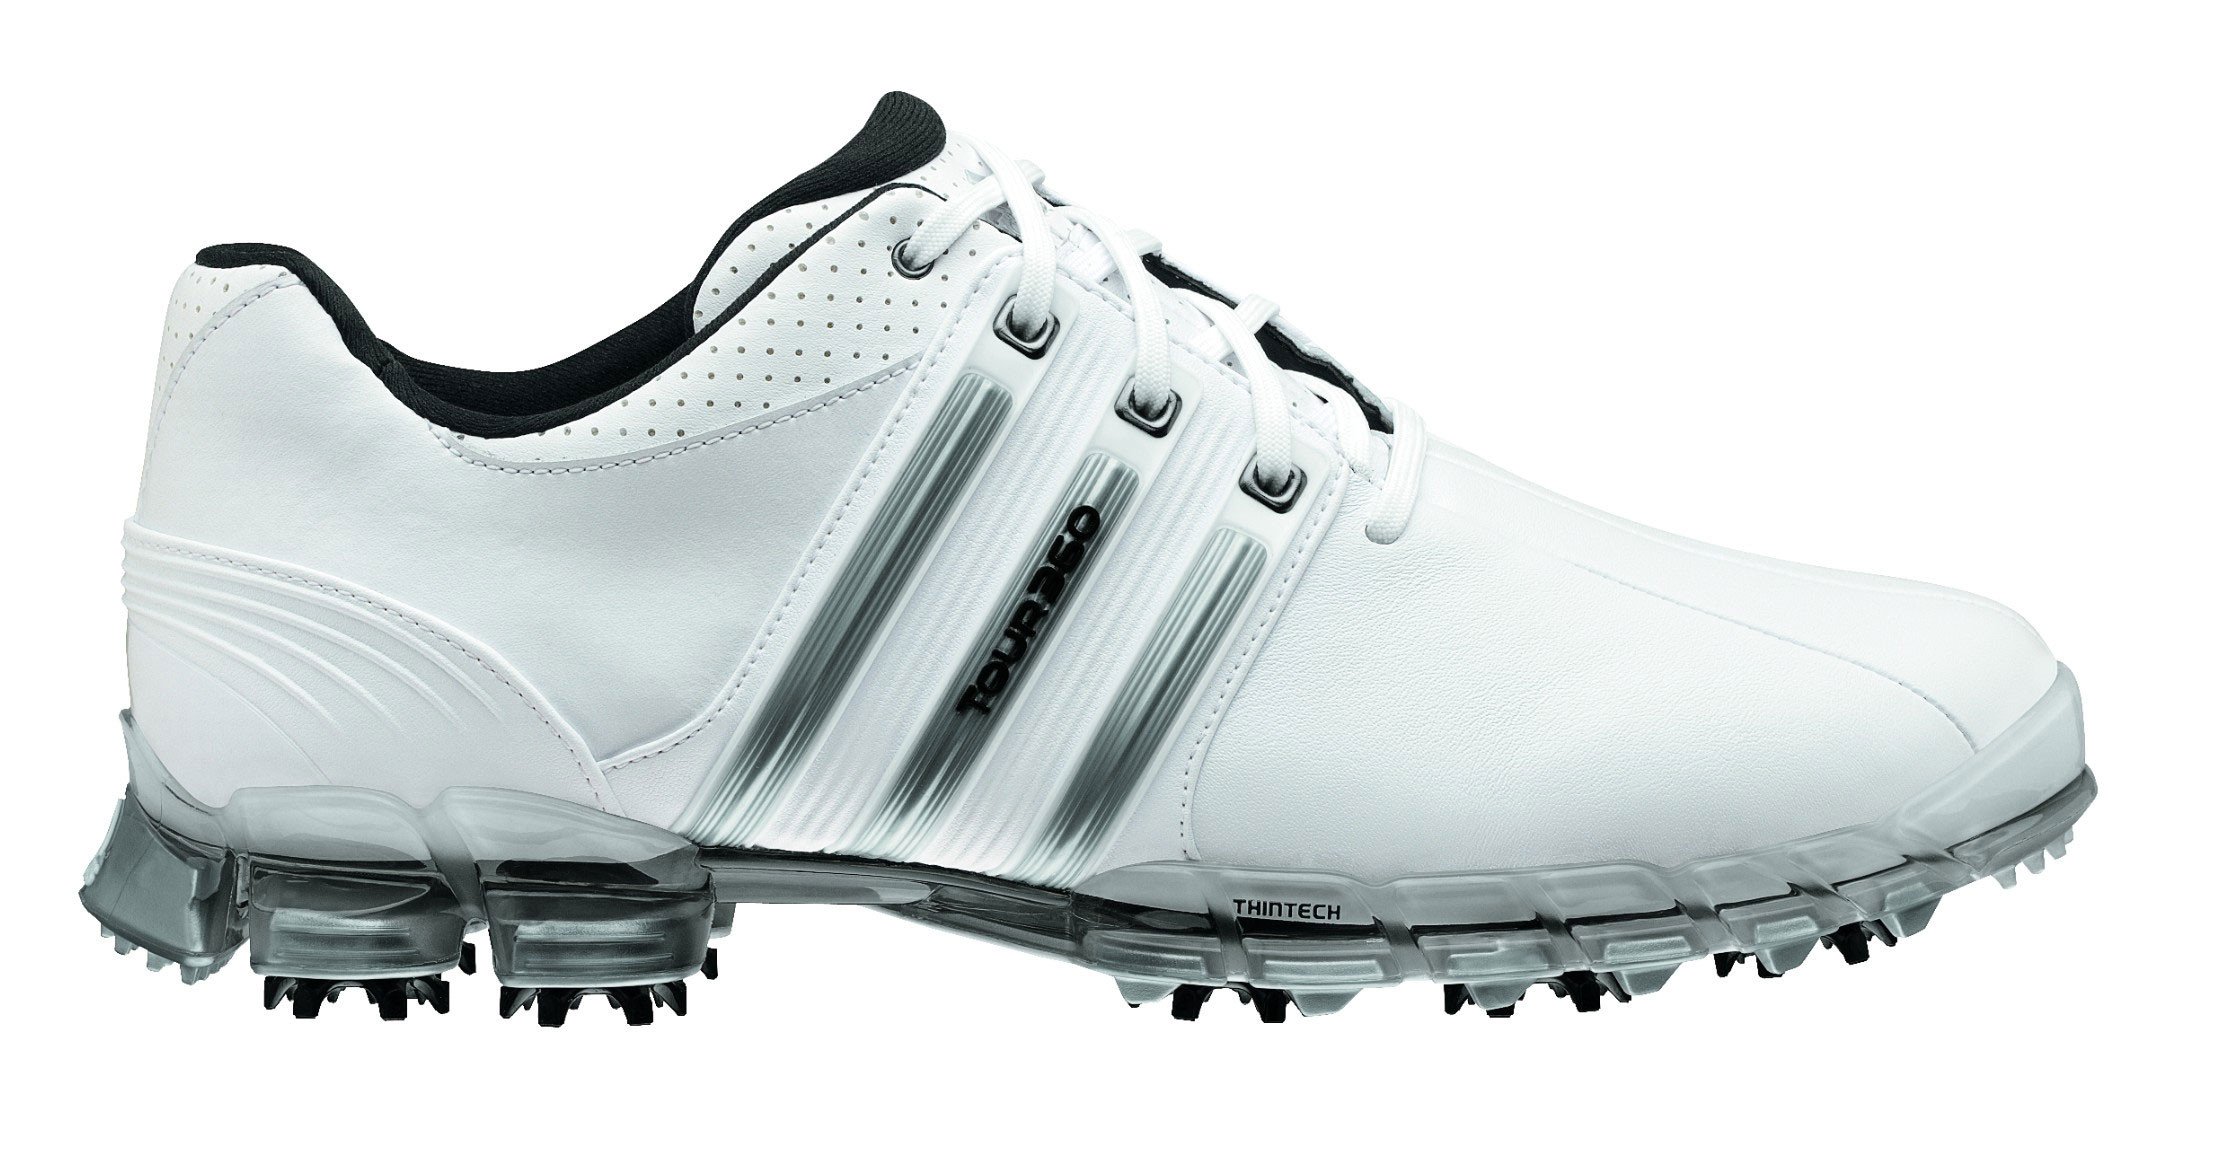 How to get discount coles for adidas tour 360 golf shoes?